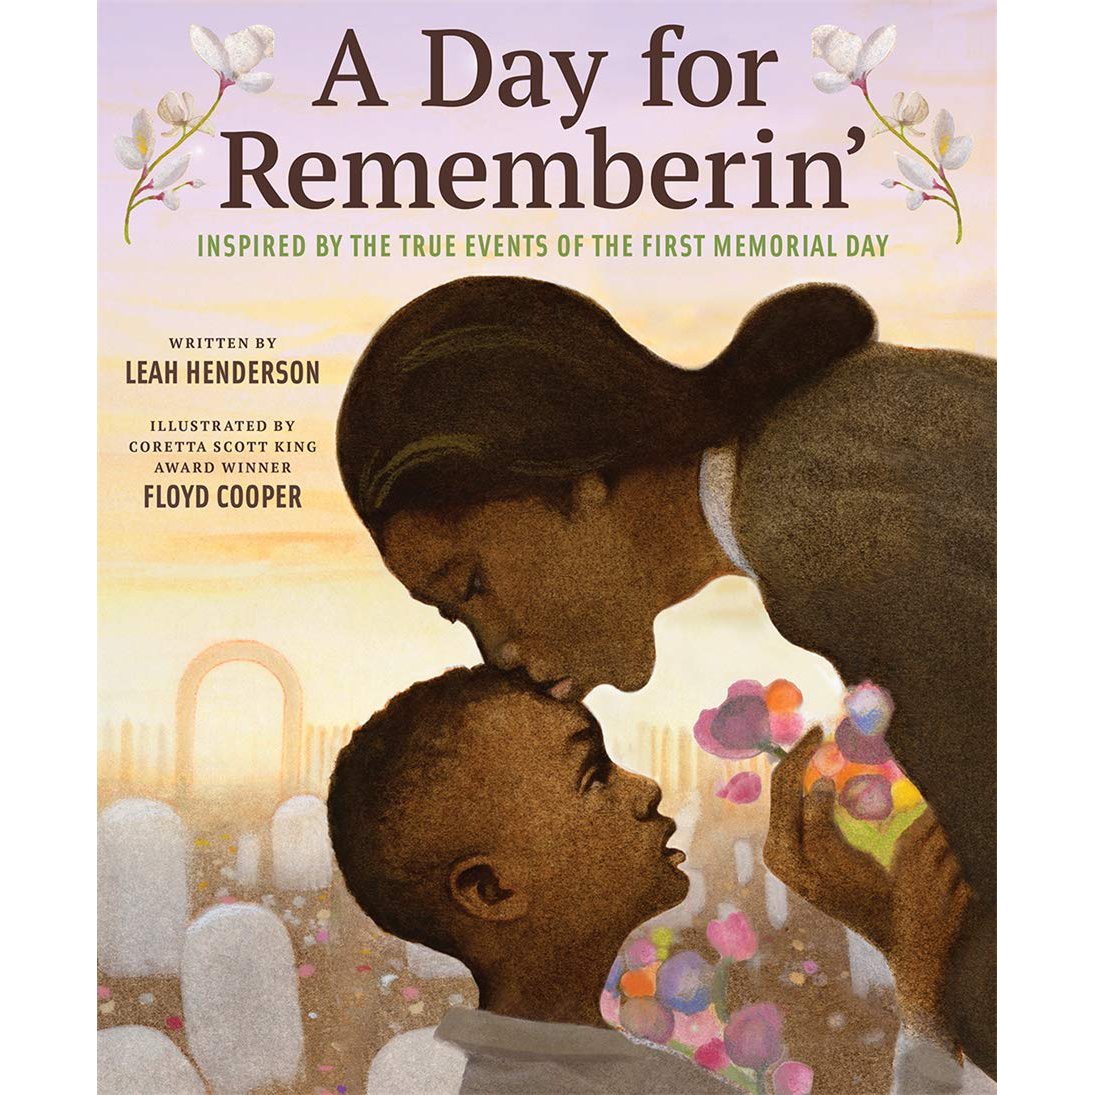 Image for "A Day for Rememberin'"